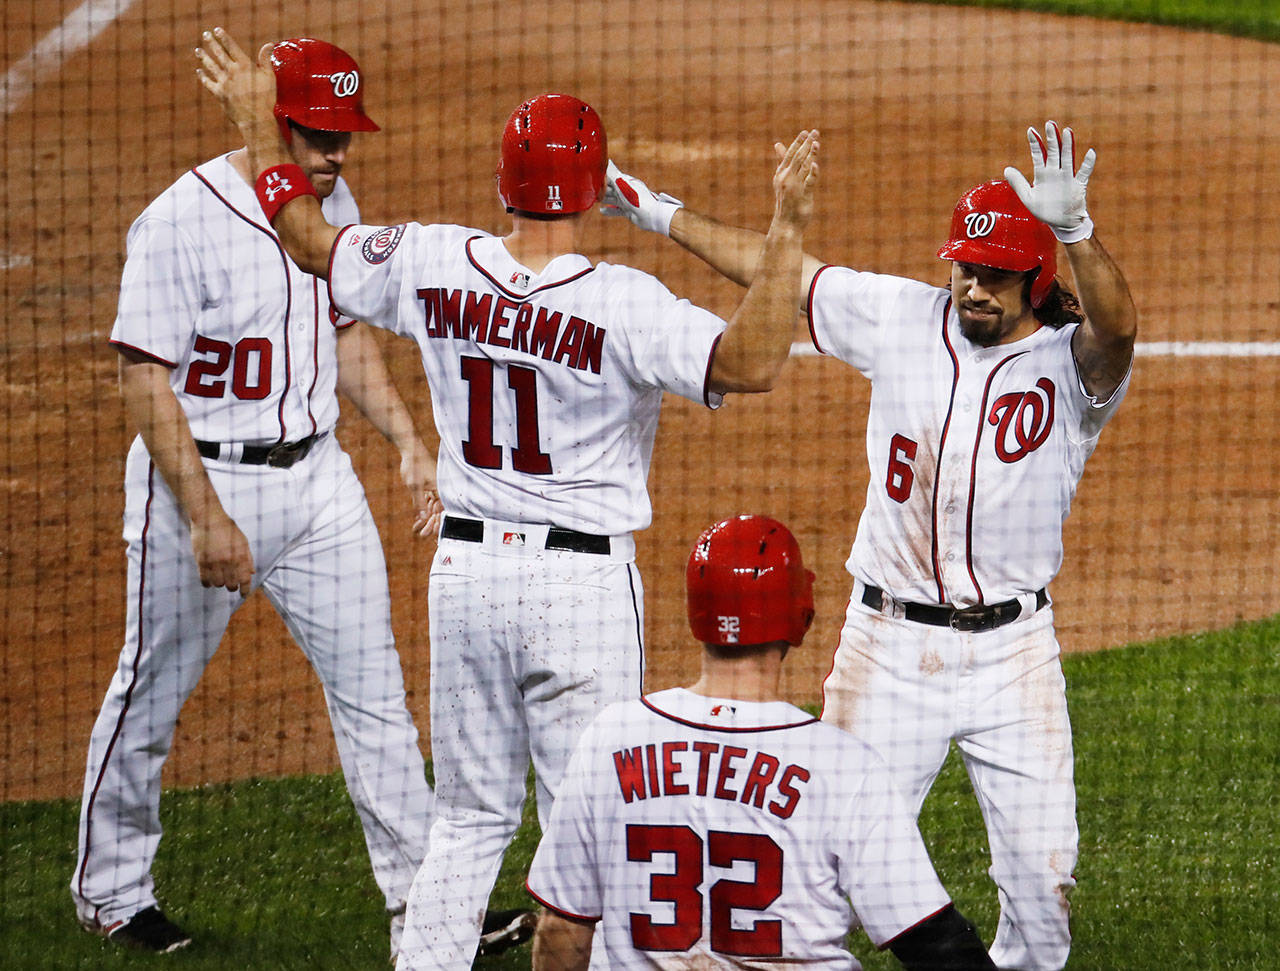 Anthony Rendon of the Washington Nationals (6) is congratulated by his teammates after hitting a three-run home run Tuesday against the Seattle Mariners. Rendon homered twice in the game. (AP Photo/Manuel Balce Ceneta)